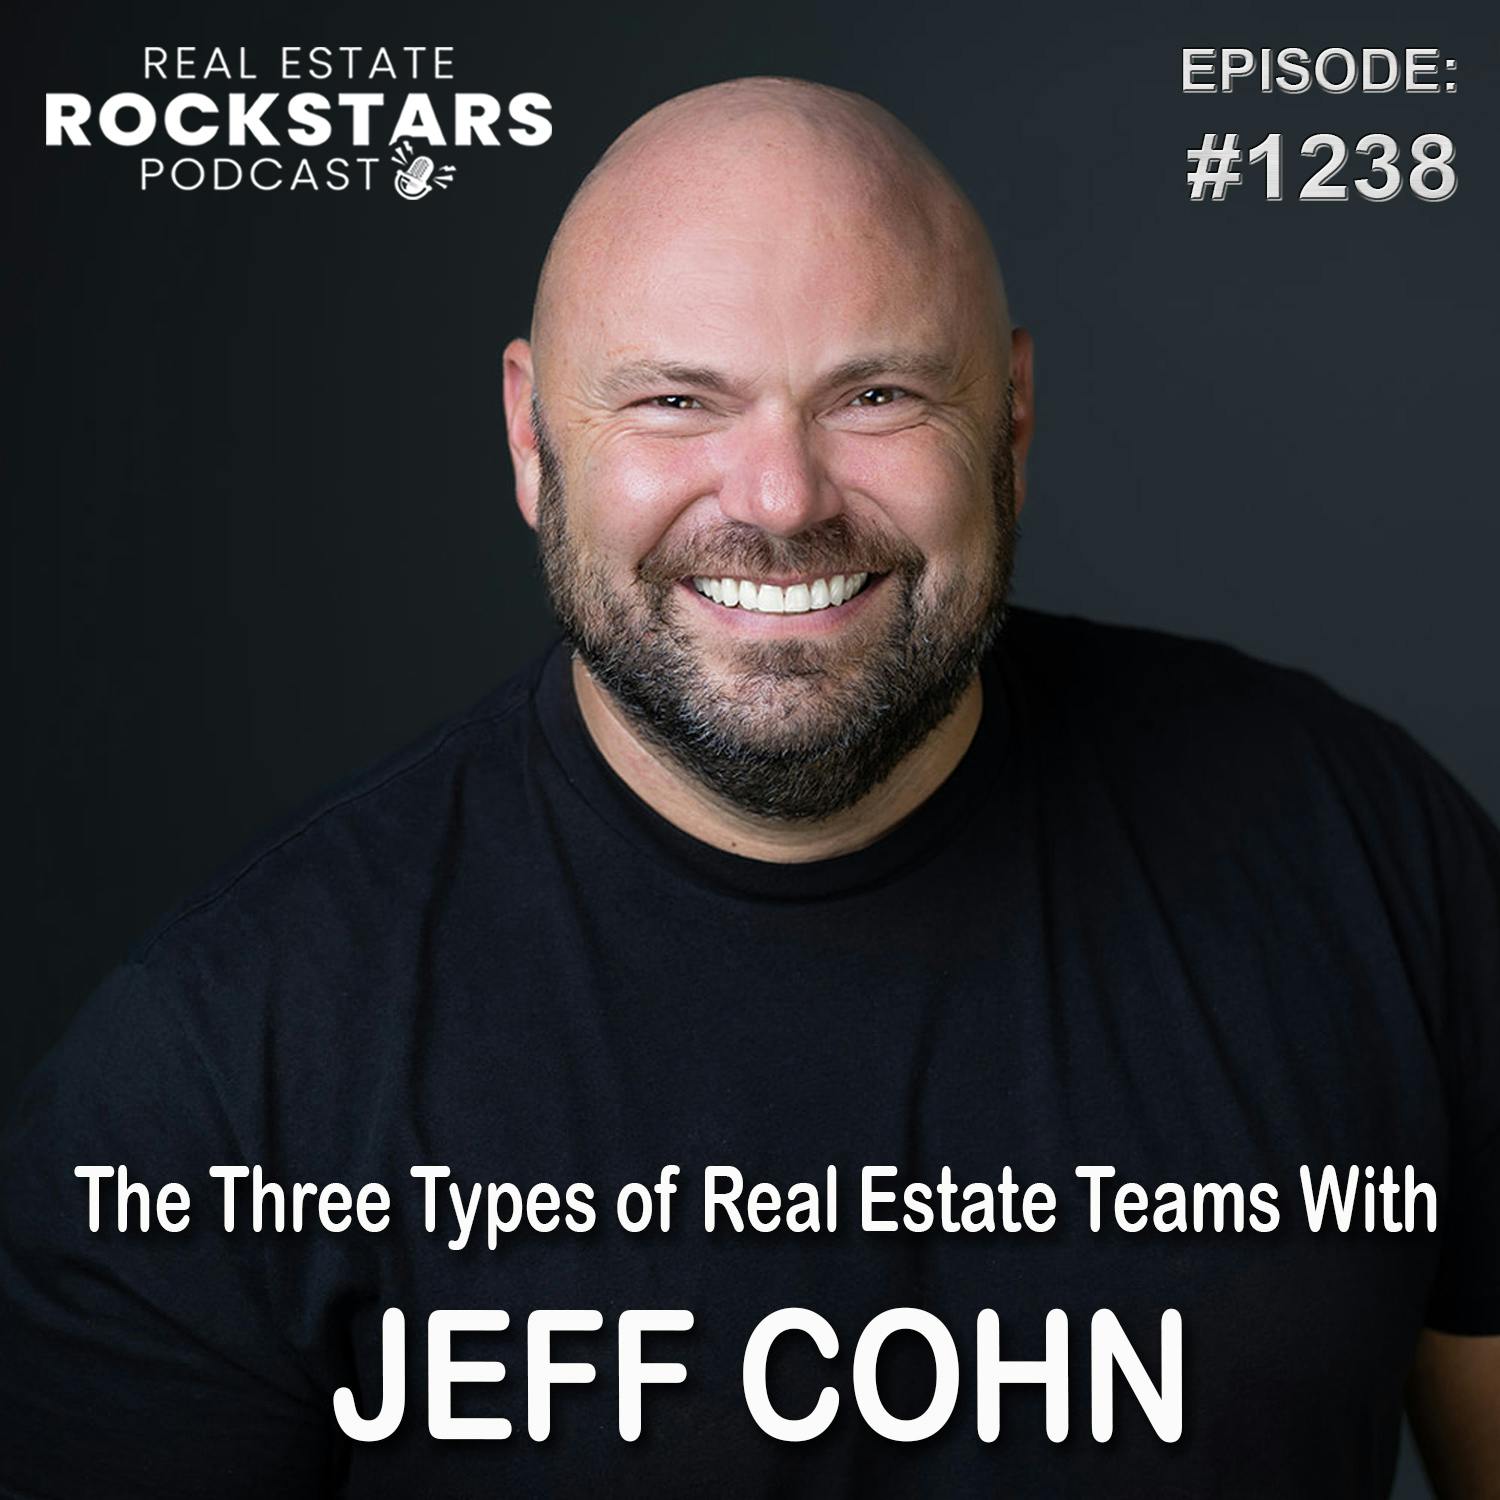 1238: The Three Types of Real Estate Teams With Jeff Cohn